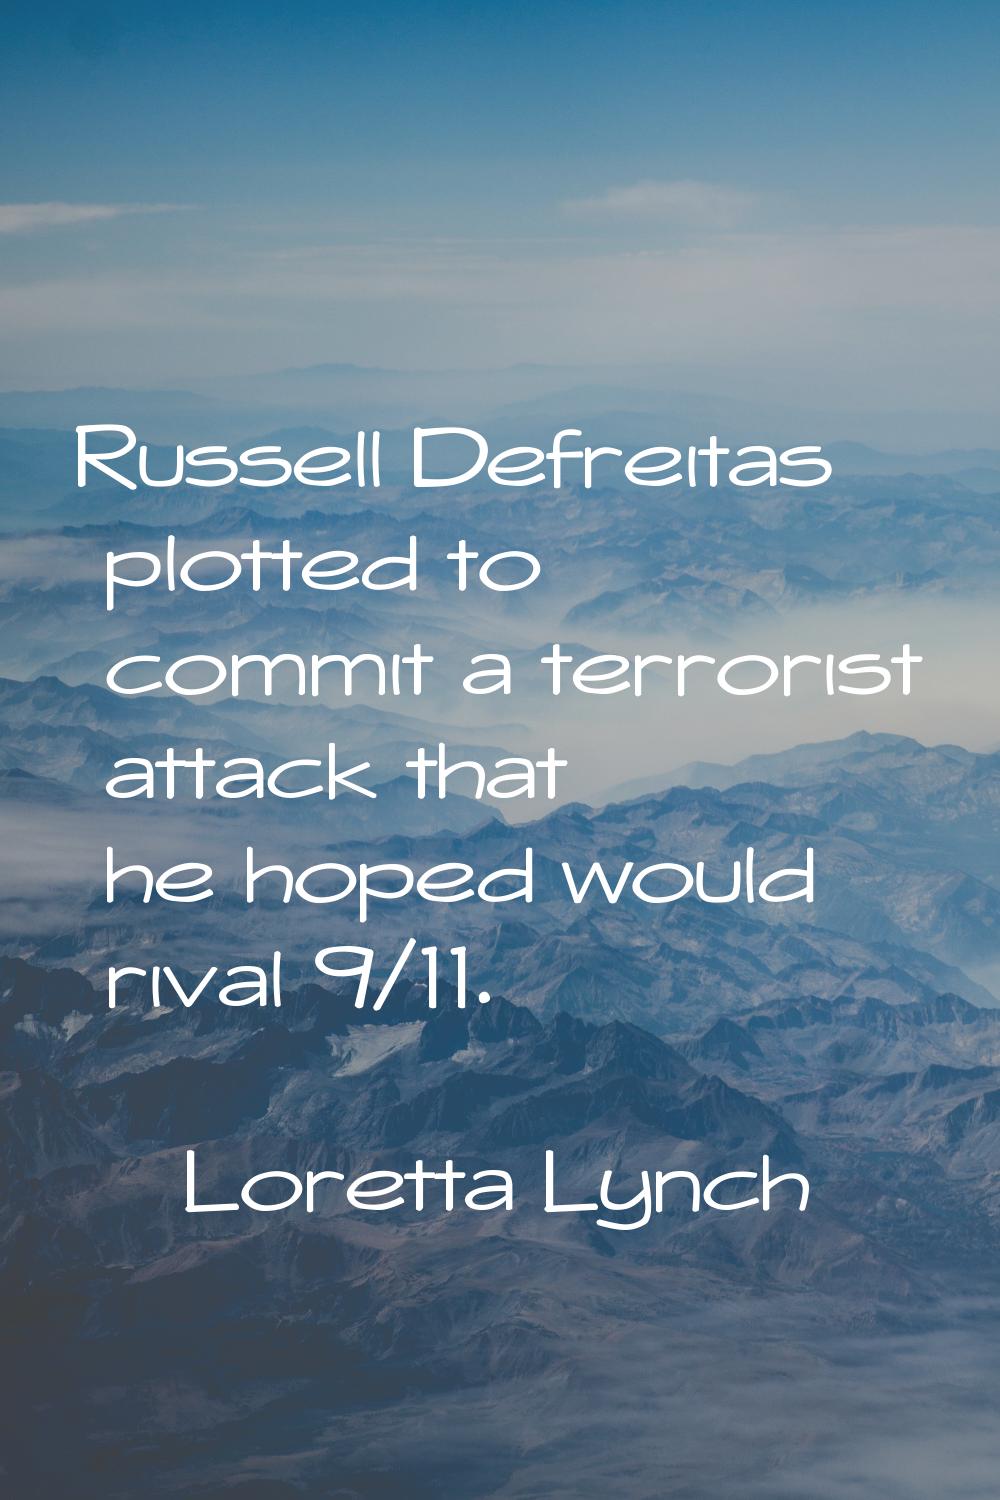 Russell Defreitas plotted to commit a terrorist attack that he hoped would rival 9/11.